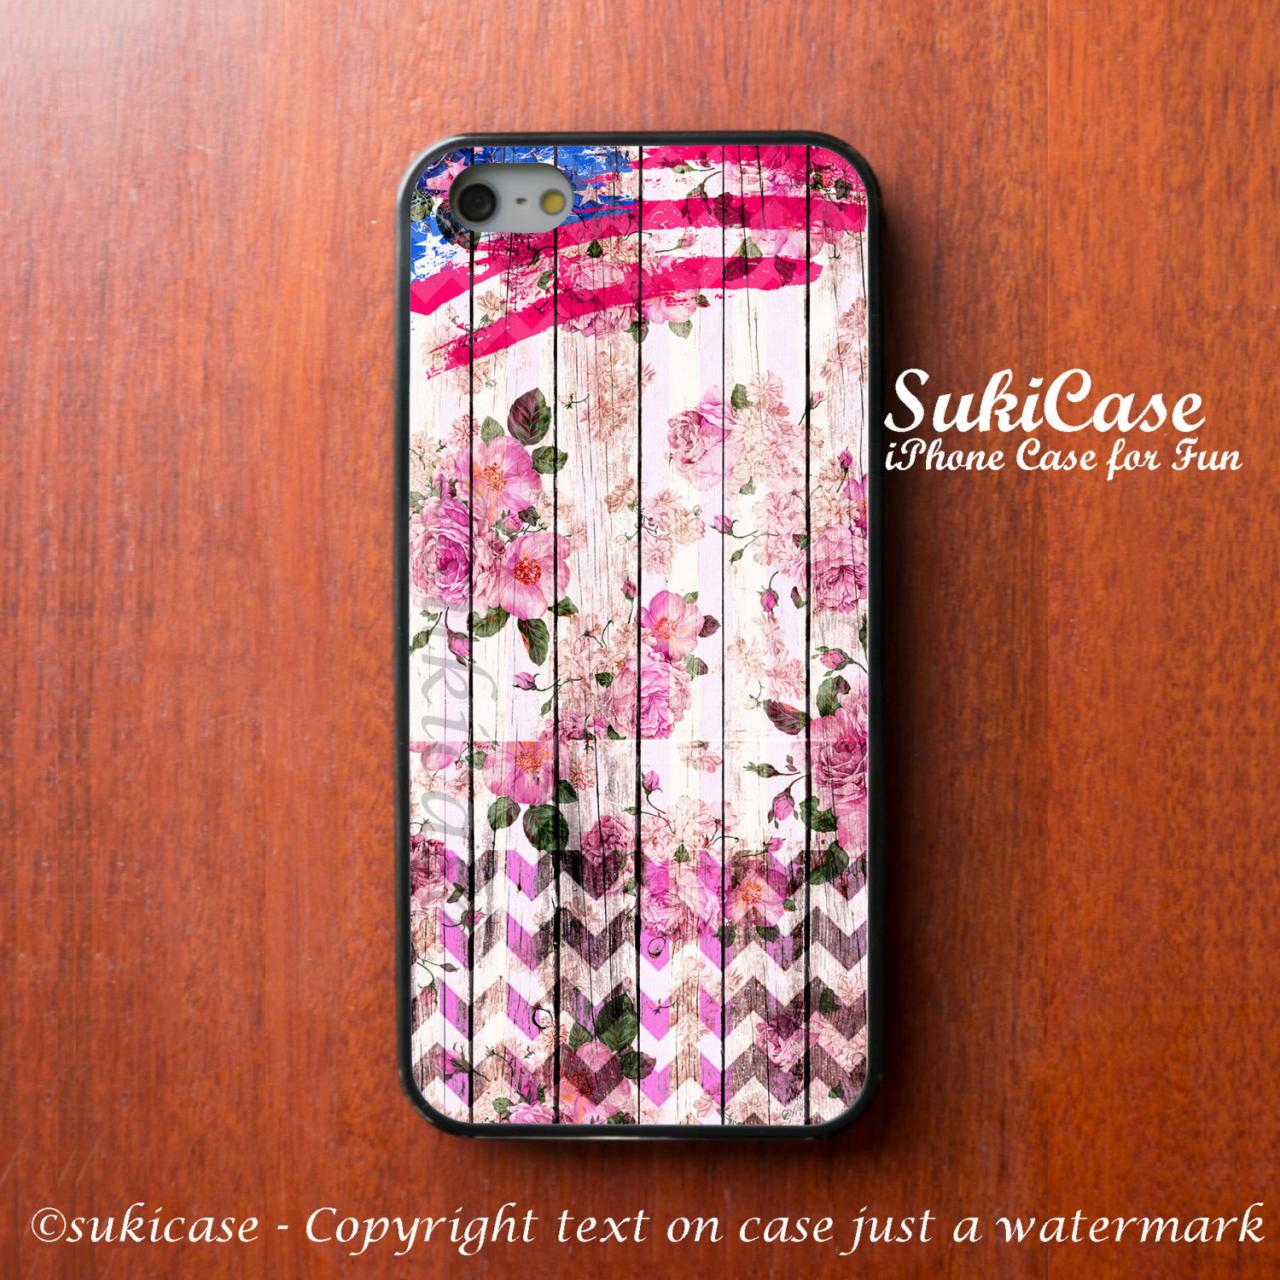 Iphone 5 Case America Flag Flower Wood Chevron Pink Girly Iphone 5s Case Iphone Case Iphone 4 Samsung S4 S3 Cover Iphone 5c Iphone 4s Cover